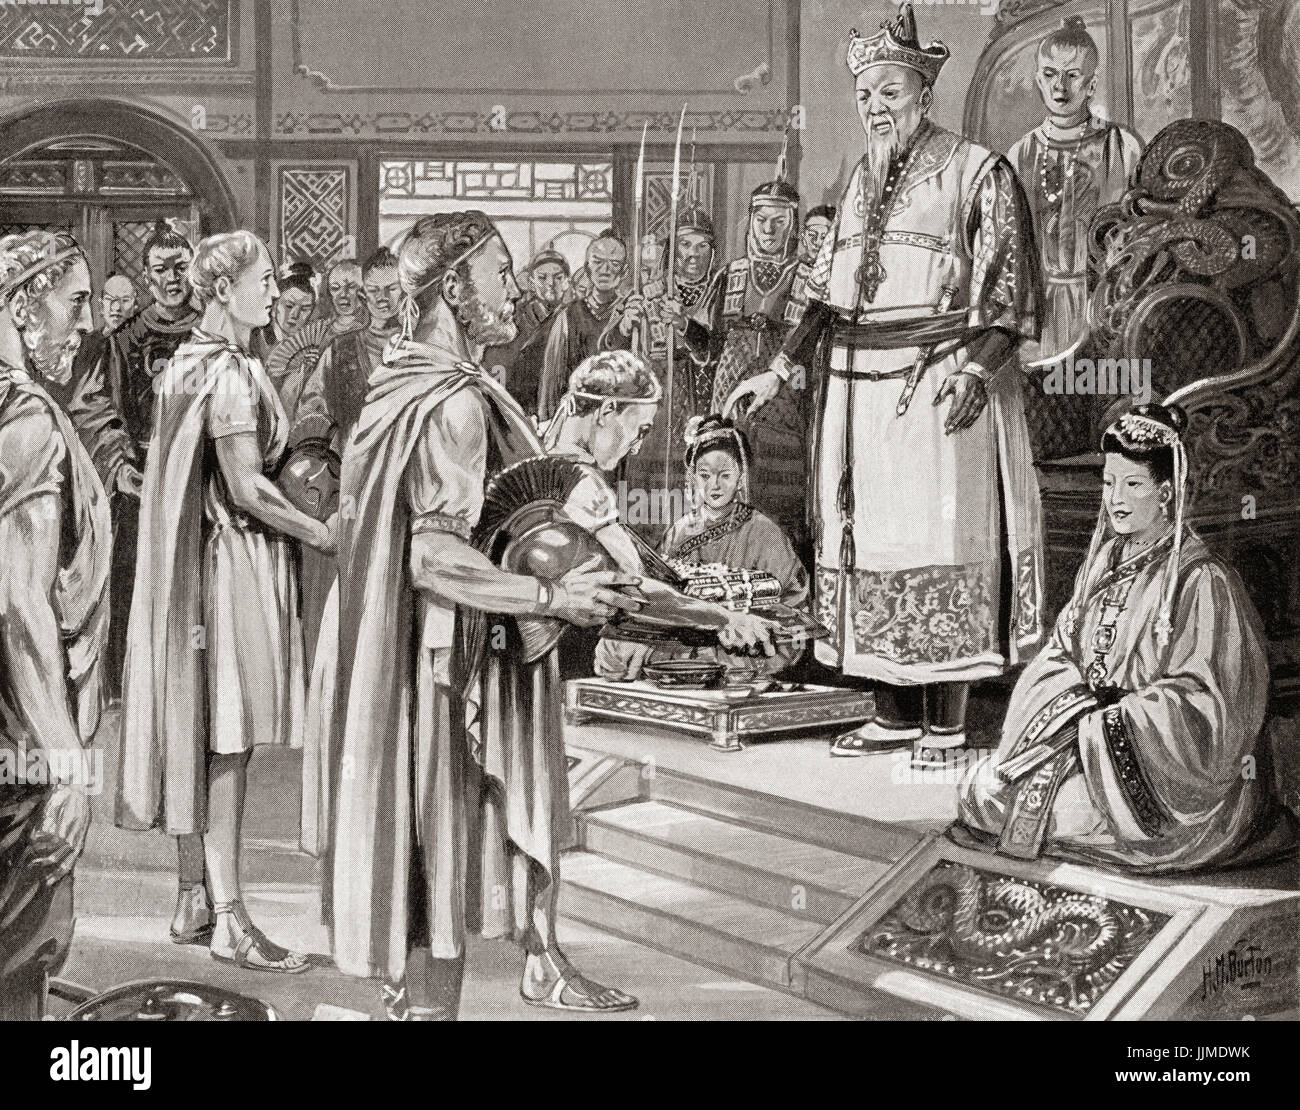 Emperor Daizong receives envoys in court from the Byzantine Emperor.  Emperor Daizong of Tang, 727 - 779,  personal name Li Yu.  Emperor of the Chinese Tang Dynasty.  From Hutchinson's History of the Nations, published 1915. Stock Photo